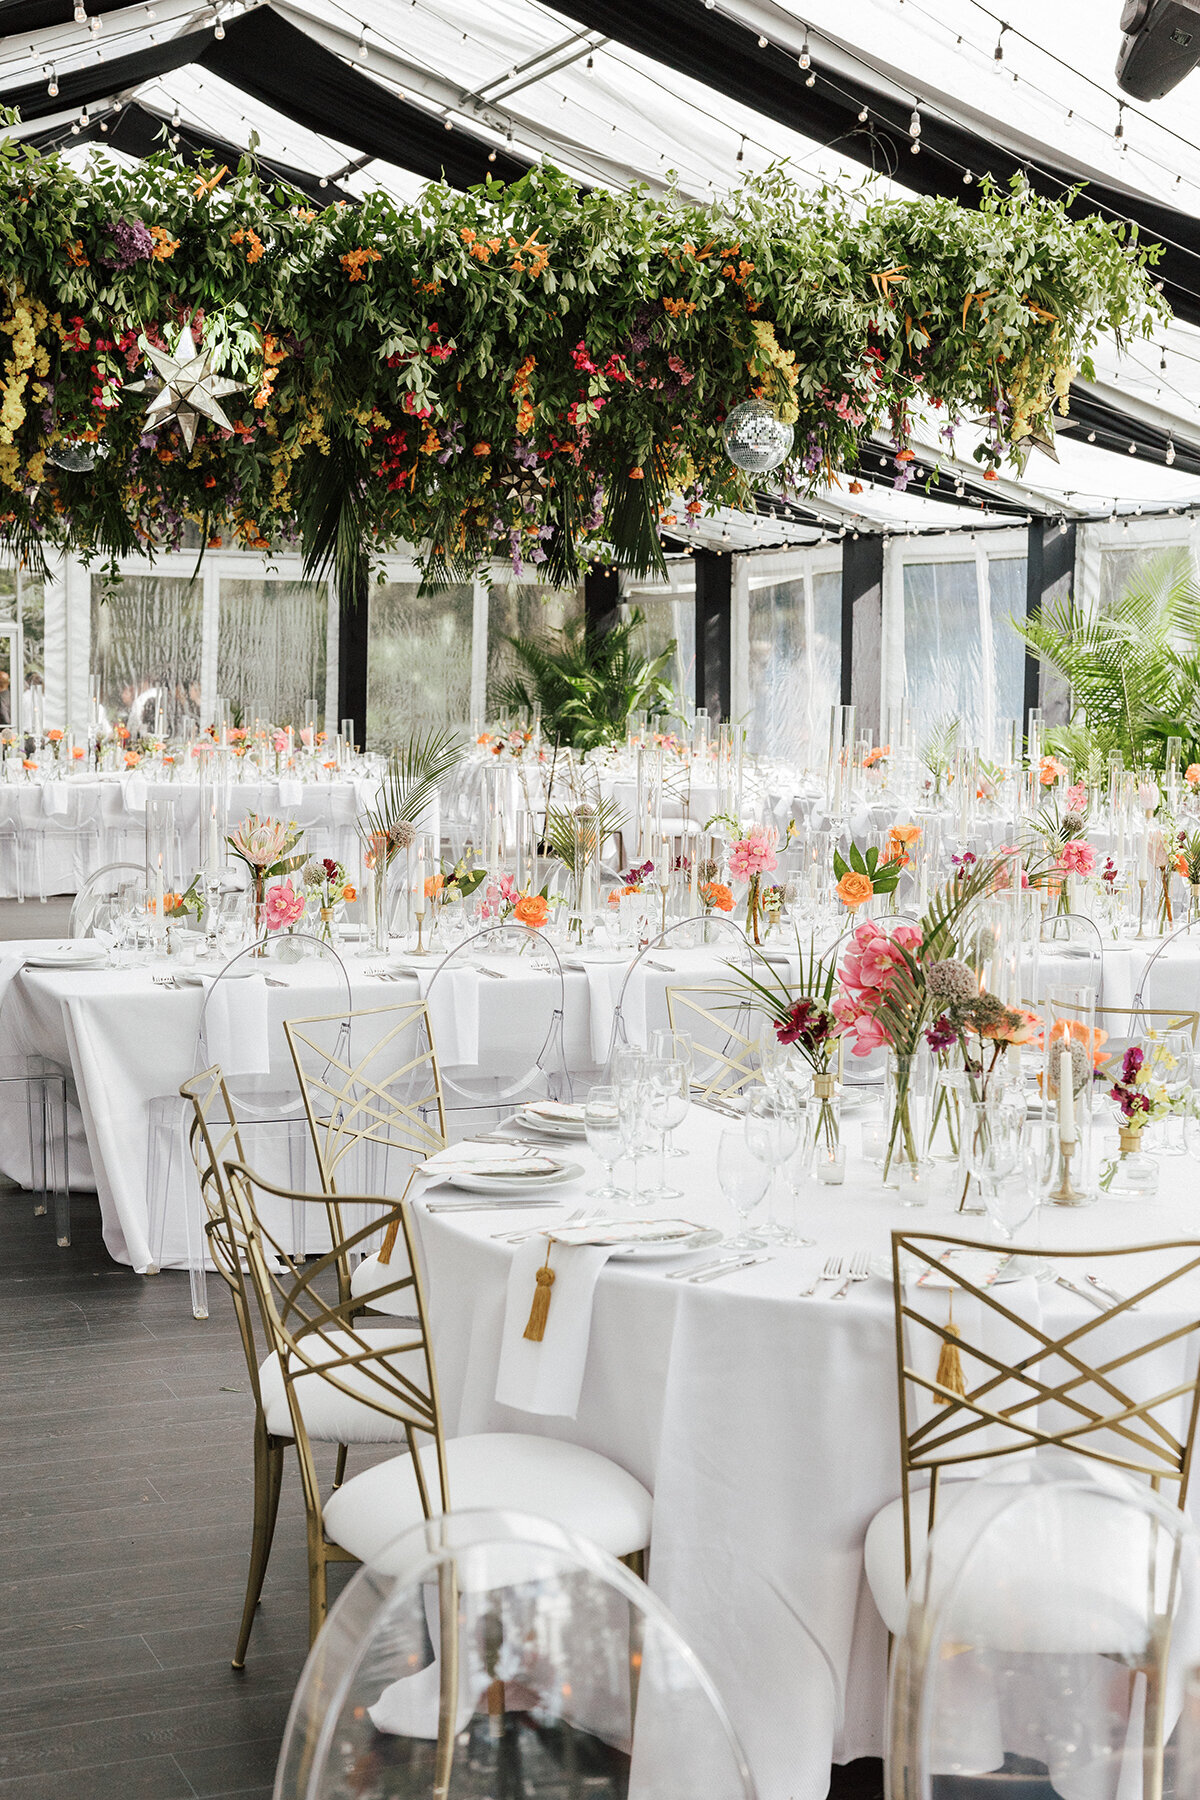 Sumner + Scott - New Orleans Museum of Art Wedding - Luxury Event Planning by Michelle Norwood - 41